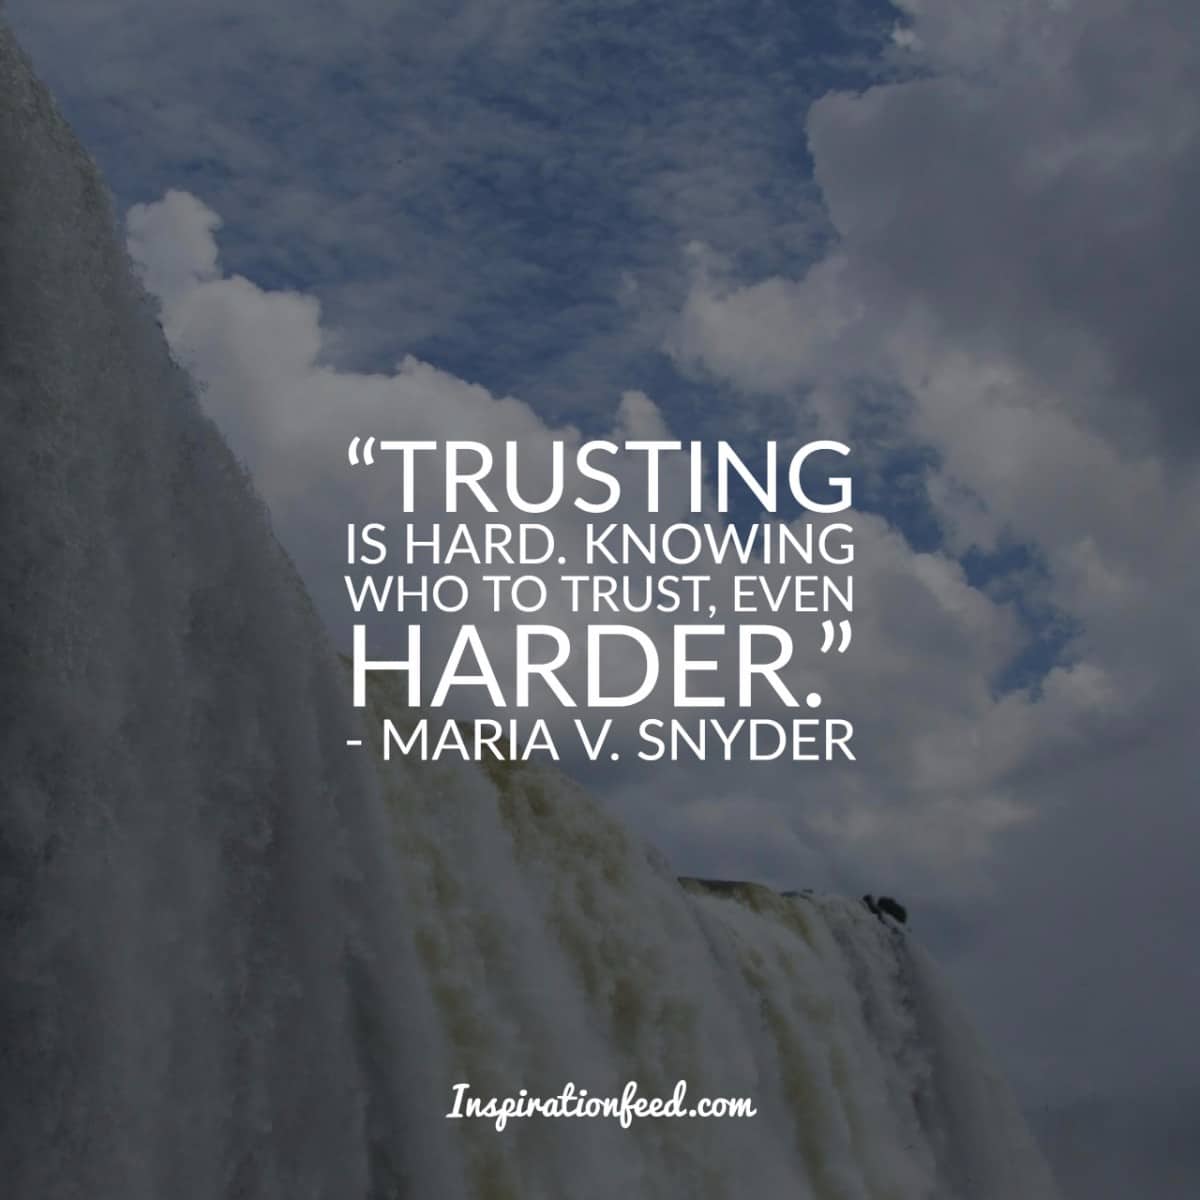 50 Wise Sayings And Quotes About Trust - Inspirationfeed